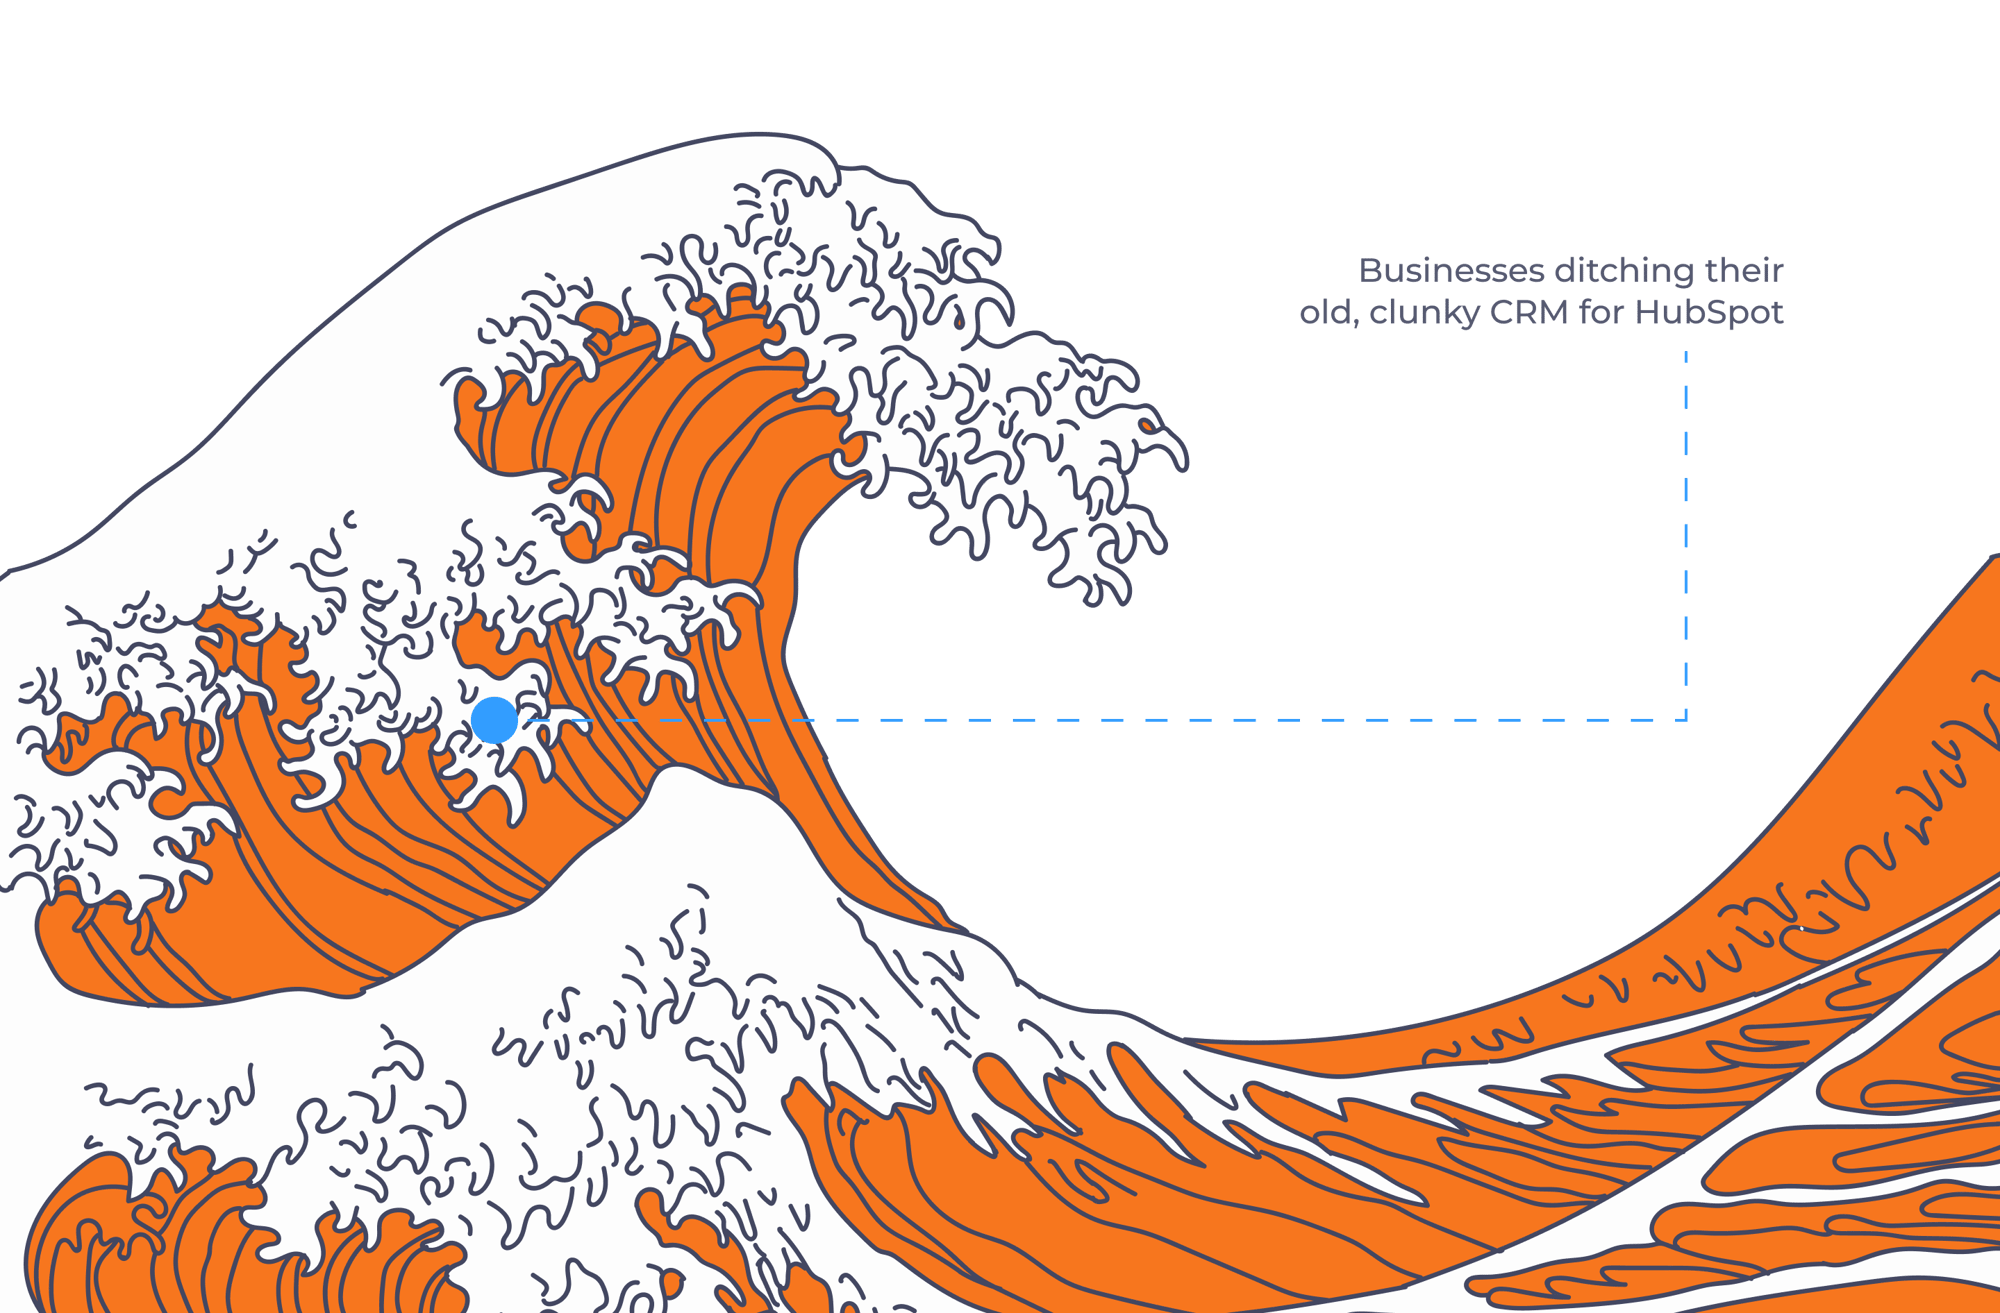 Stylized Kanagawa Wave - Businesses ditching their old, clunky CRM for HubSpot